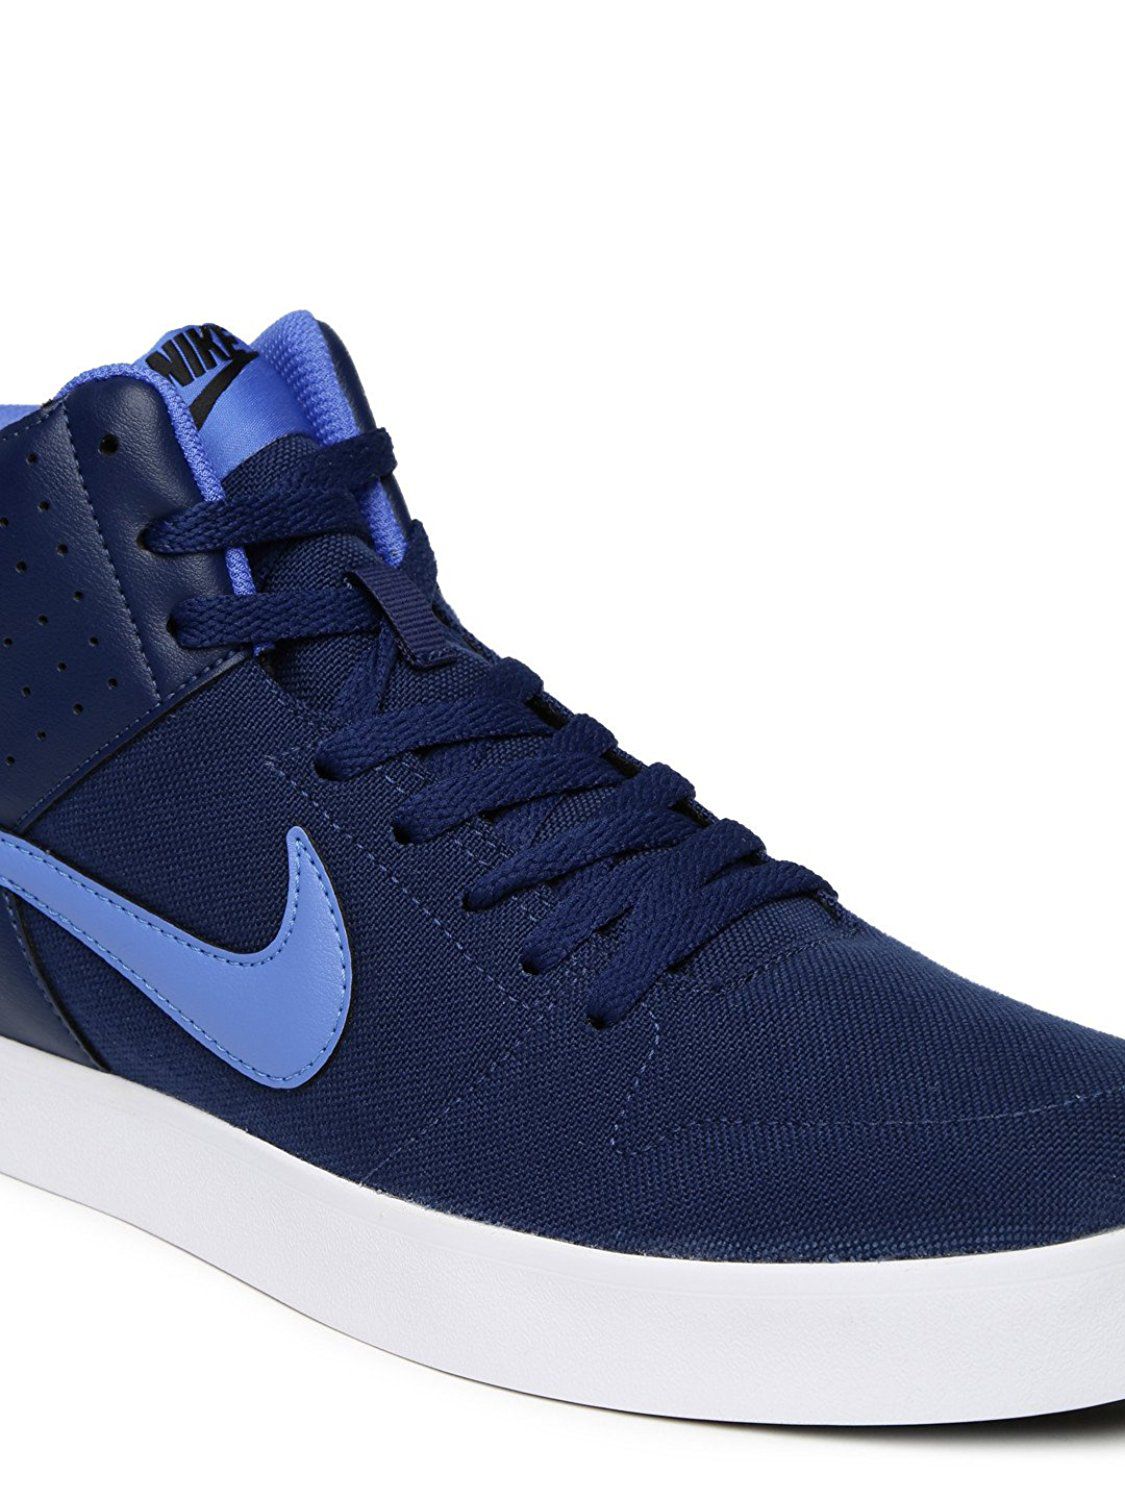 Dime oleada Propio Nike Sneakers Blue Casual Shoes - Buy Nike Sneakers Blue Casual Shoes  Online at Best Prices in India on Snapdeal